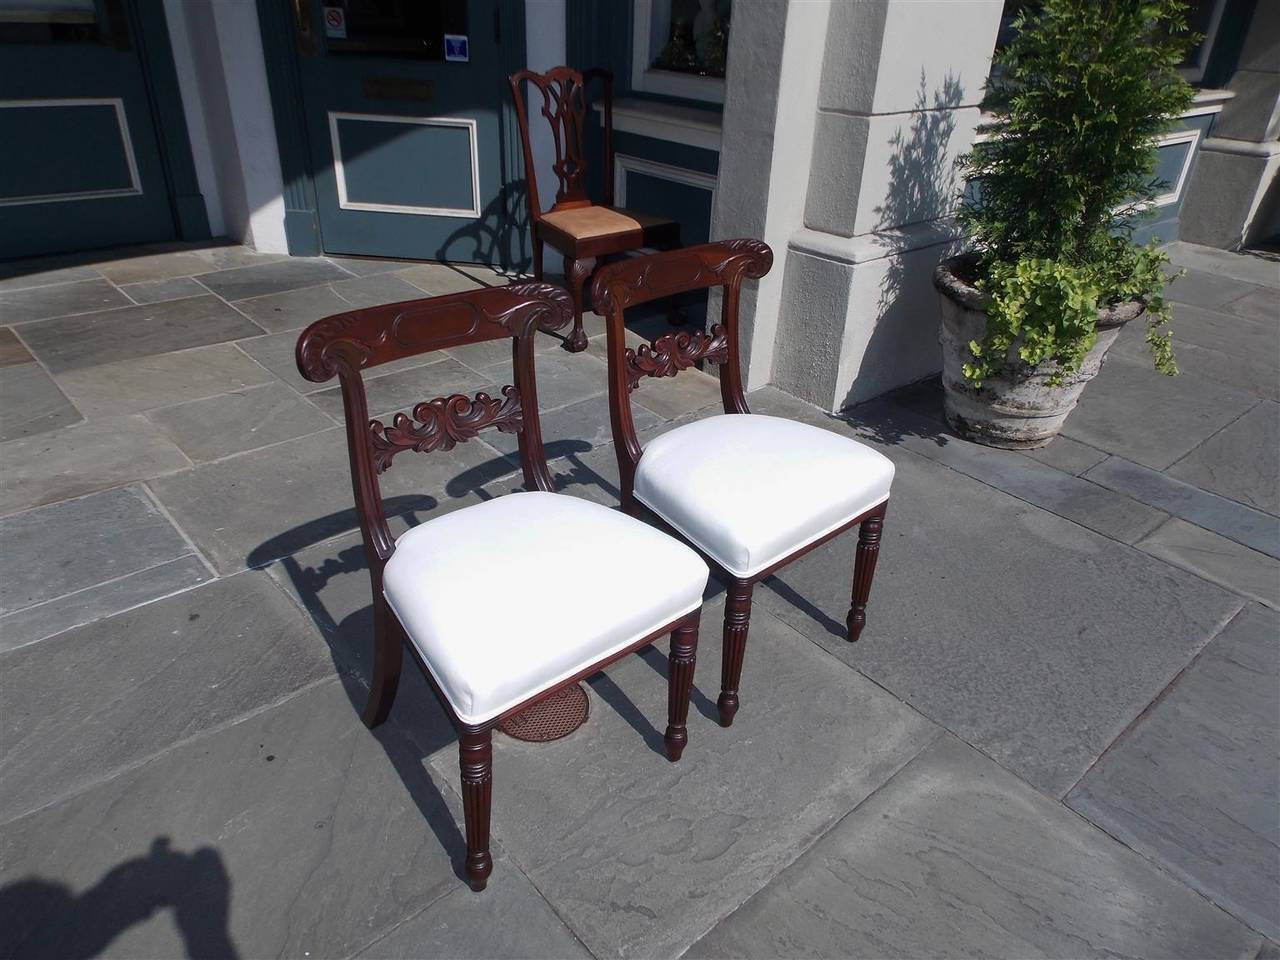 Pair of American Regency mahogany side chairs with carved acanthus and lotus splat backs, white muslin upholstered seat bottoms, and terminating on turned bulbous reeded legs, Early 19th Century. Baltimore.